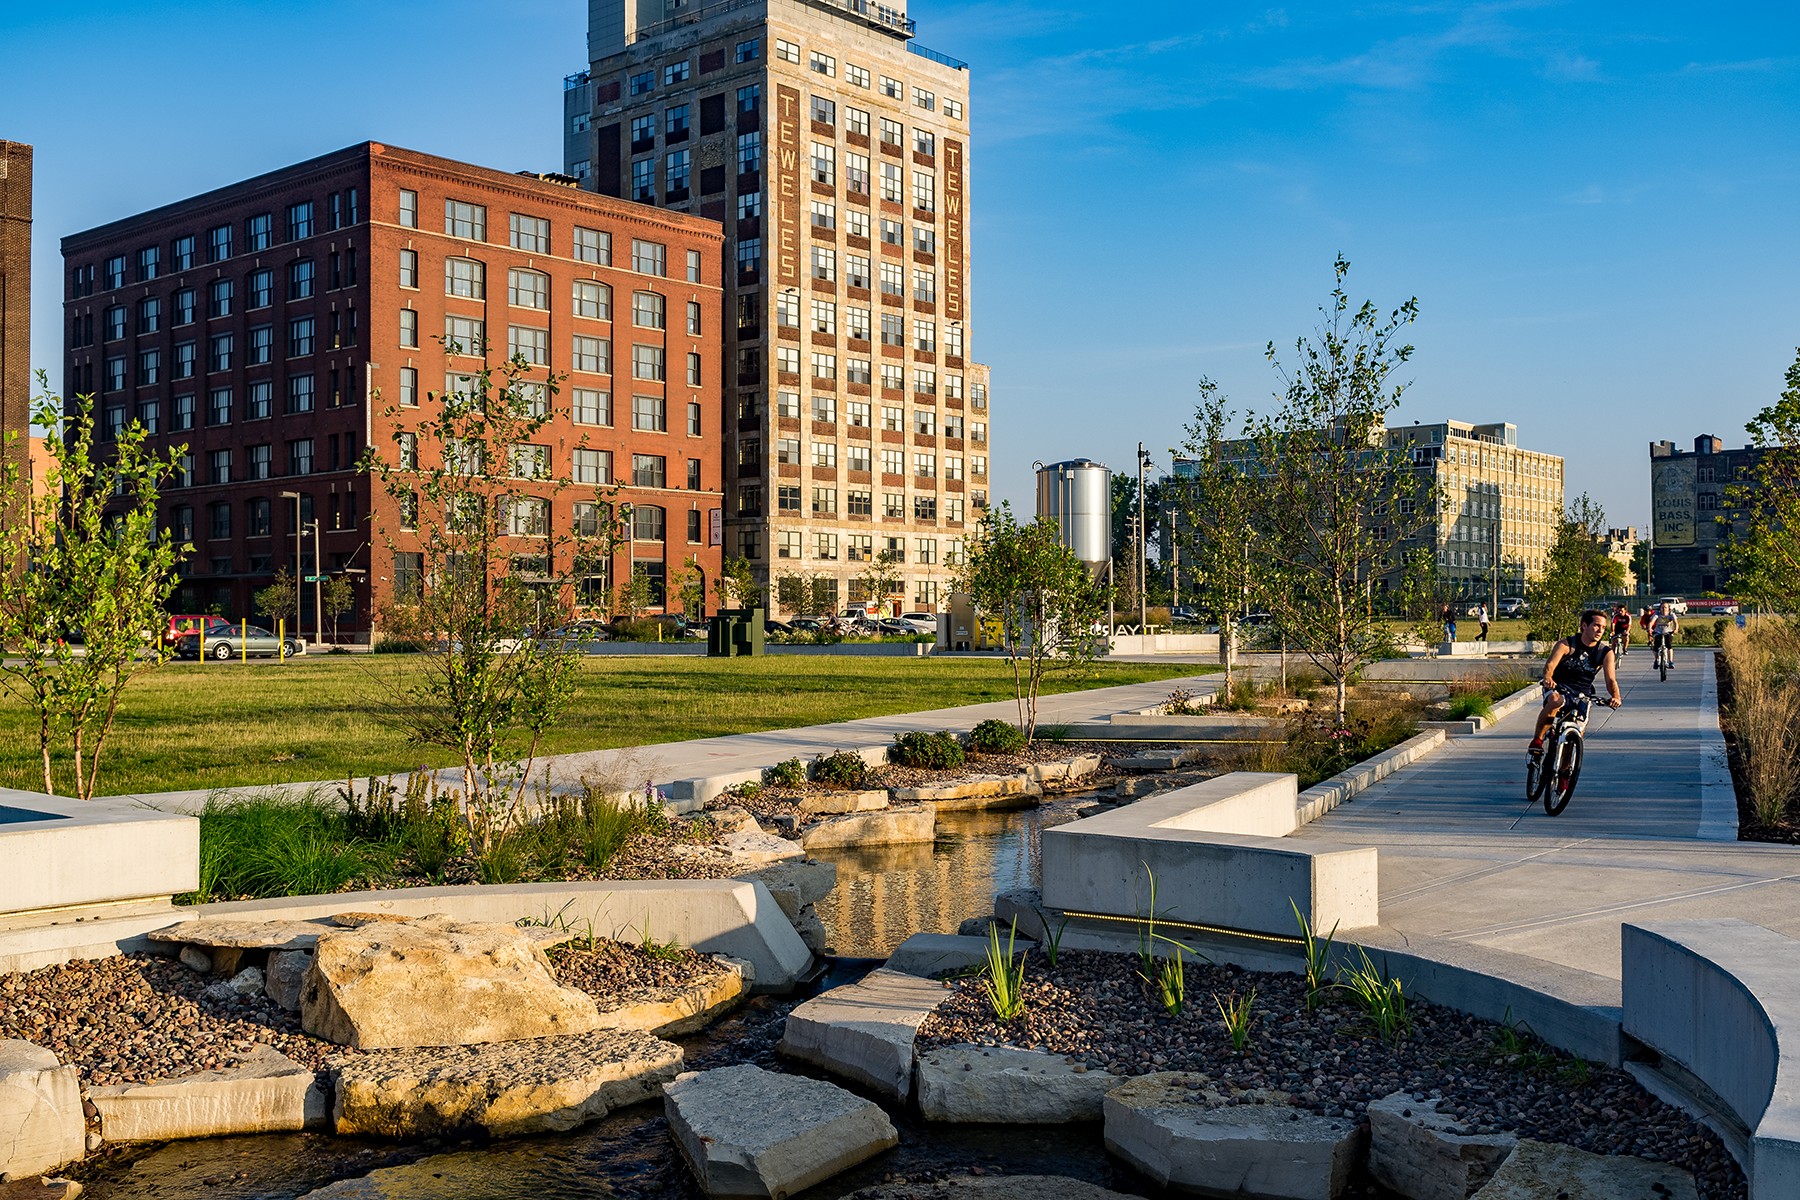 Infrastructure Week 2019: Brownfield development is the future of the US urban landscape